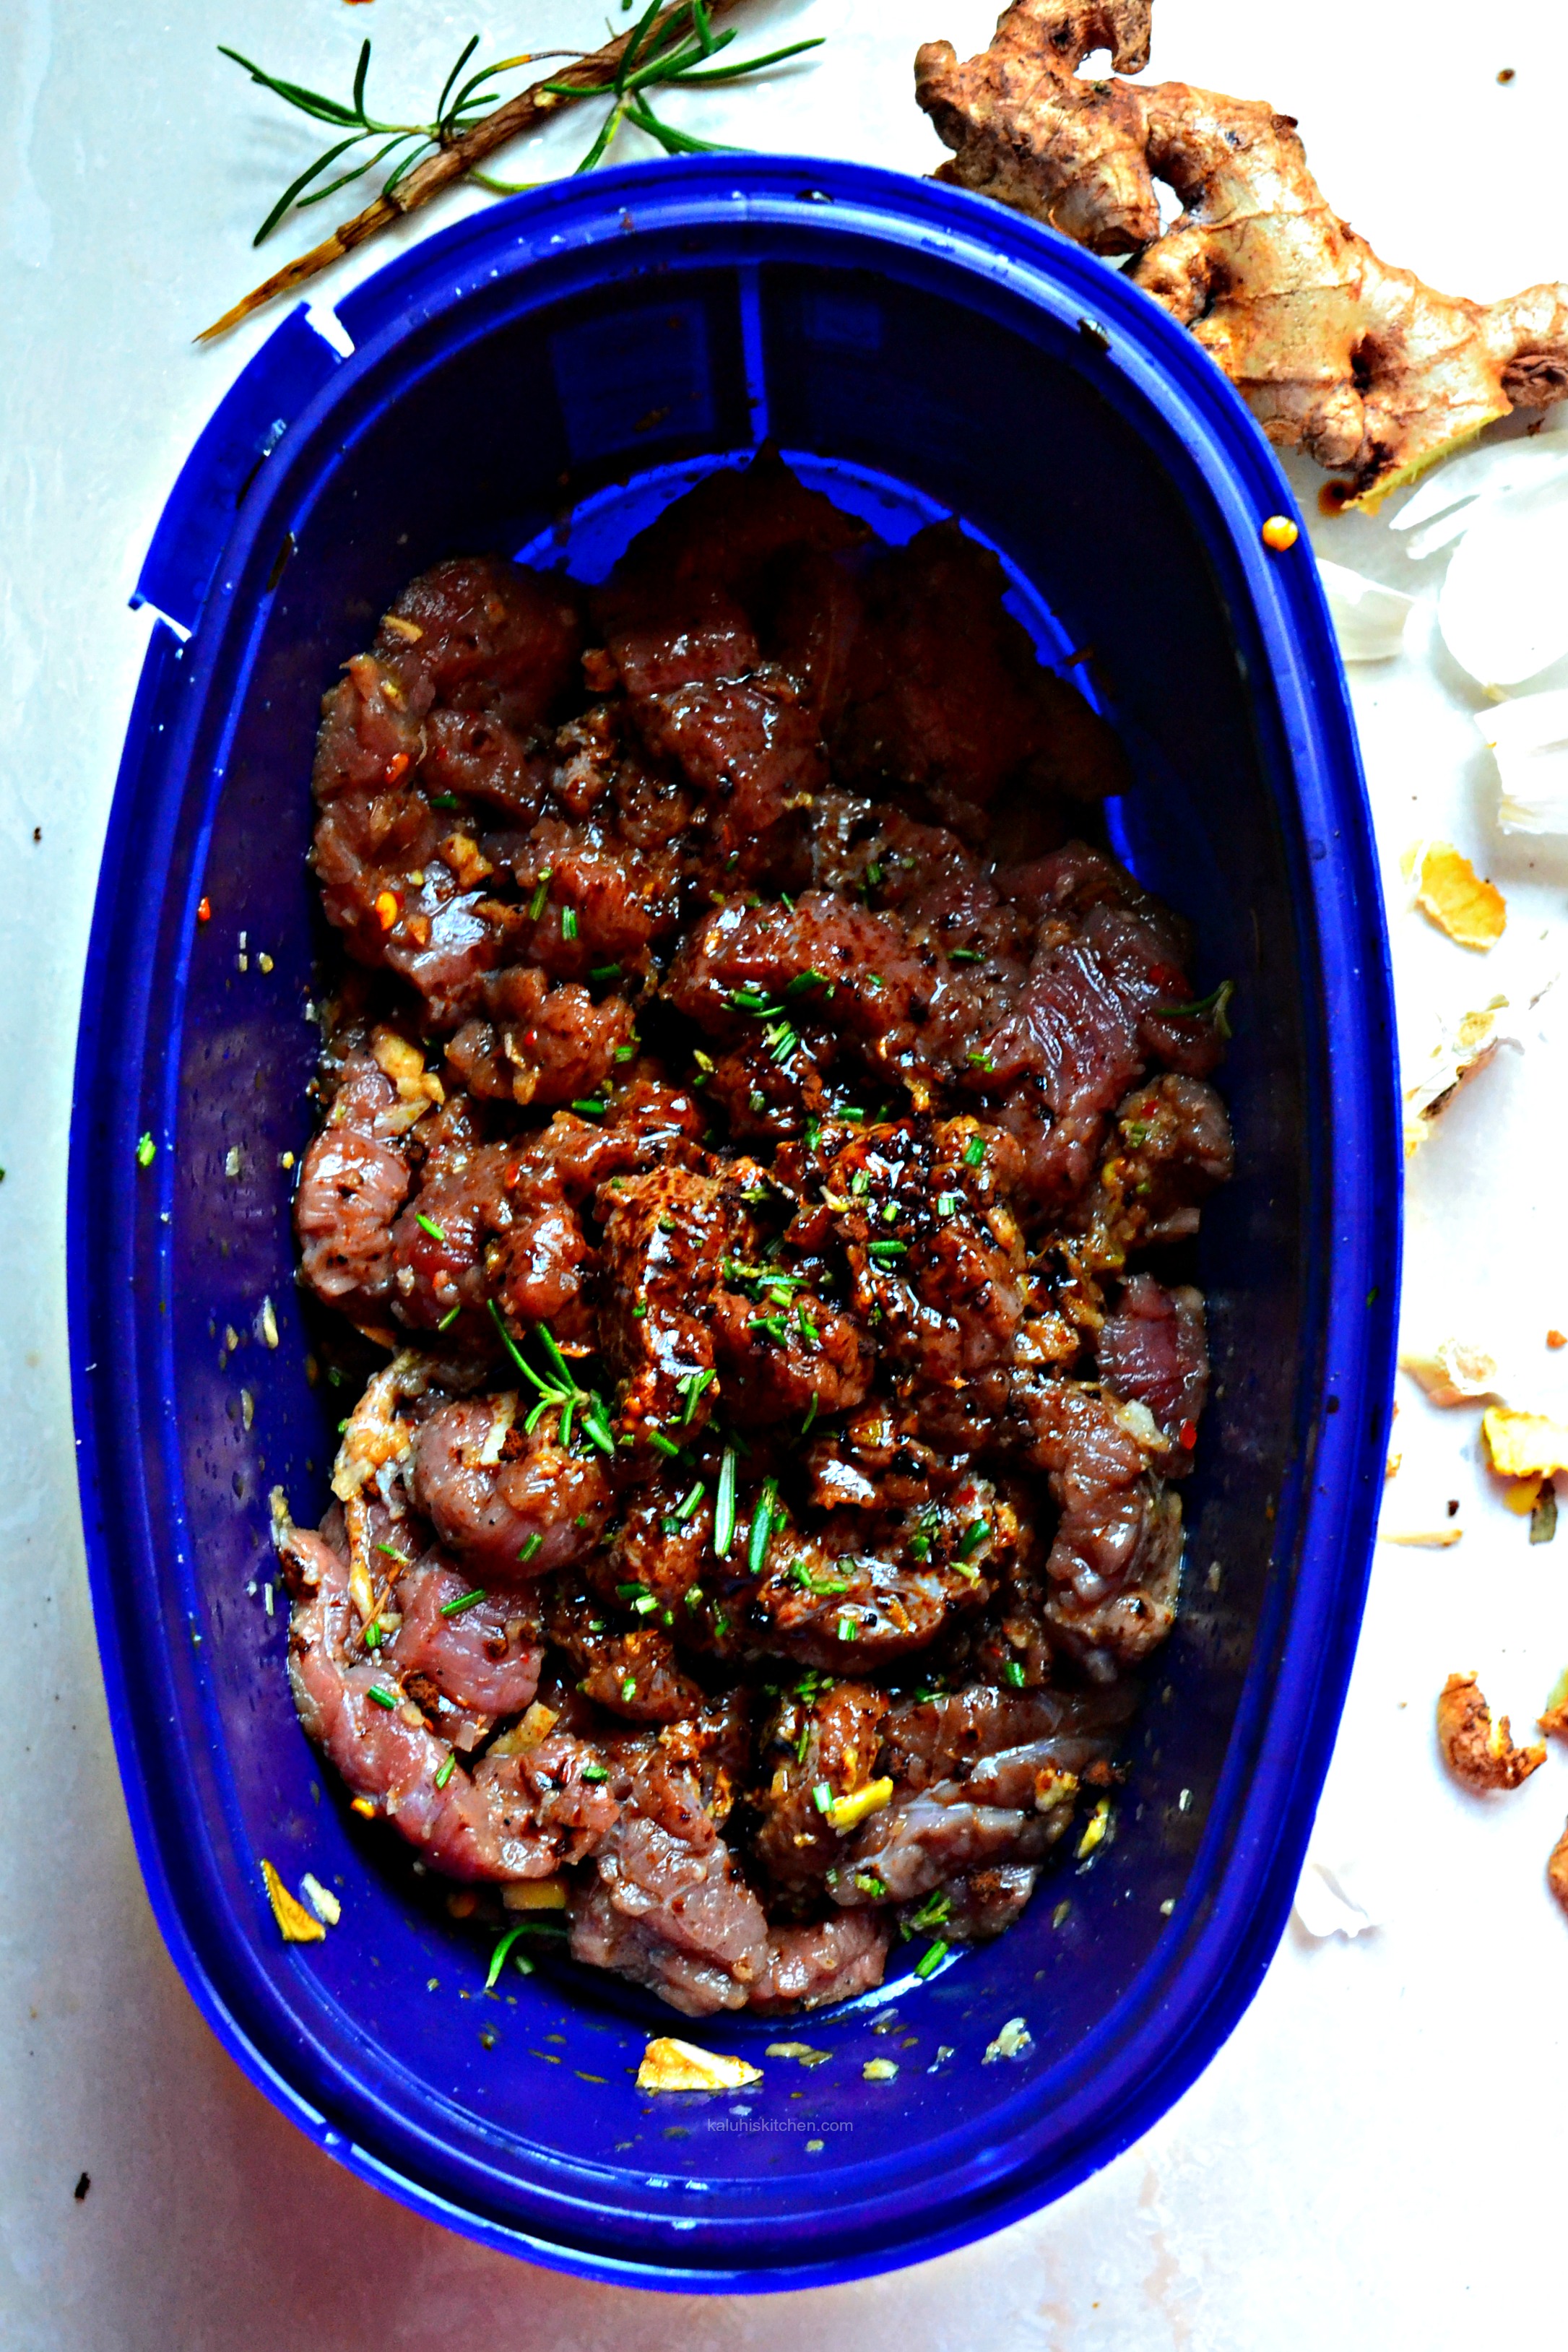 marinate-your-beef-in-coffee-rosemary-redwinne-vinegar-chili-garlic-ginger-for-24-hours-for-best-results_kaluhiskitchen-com